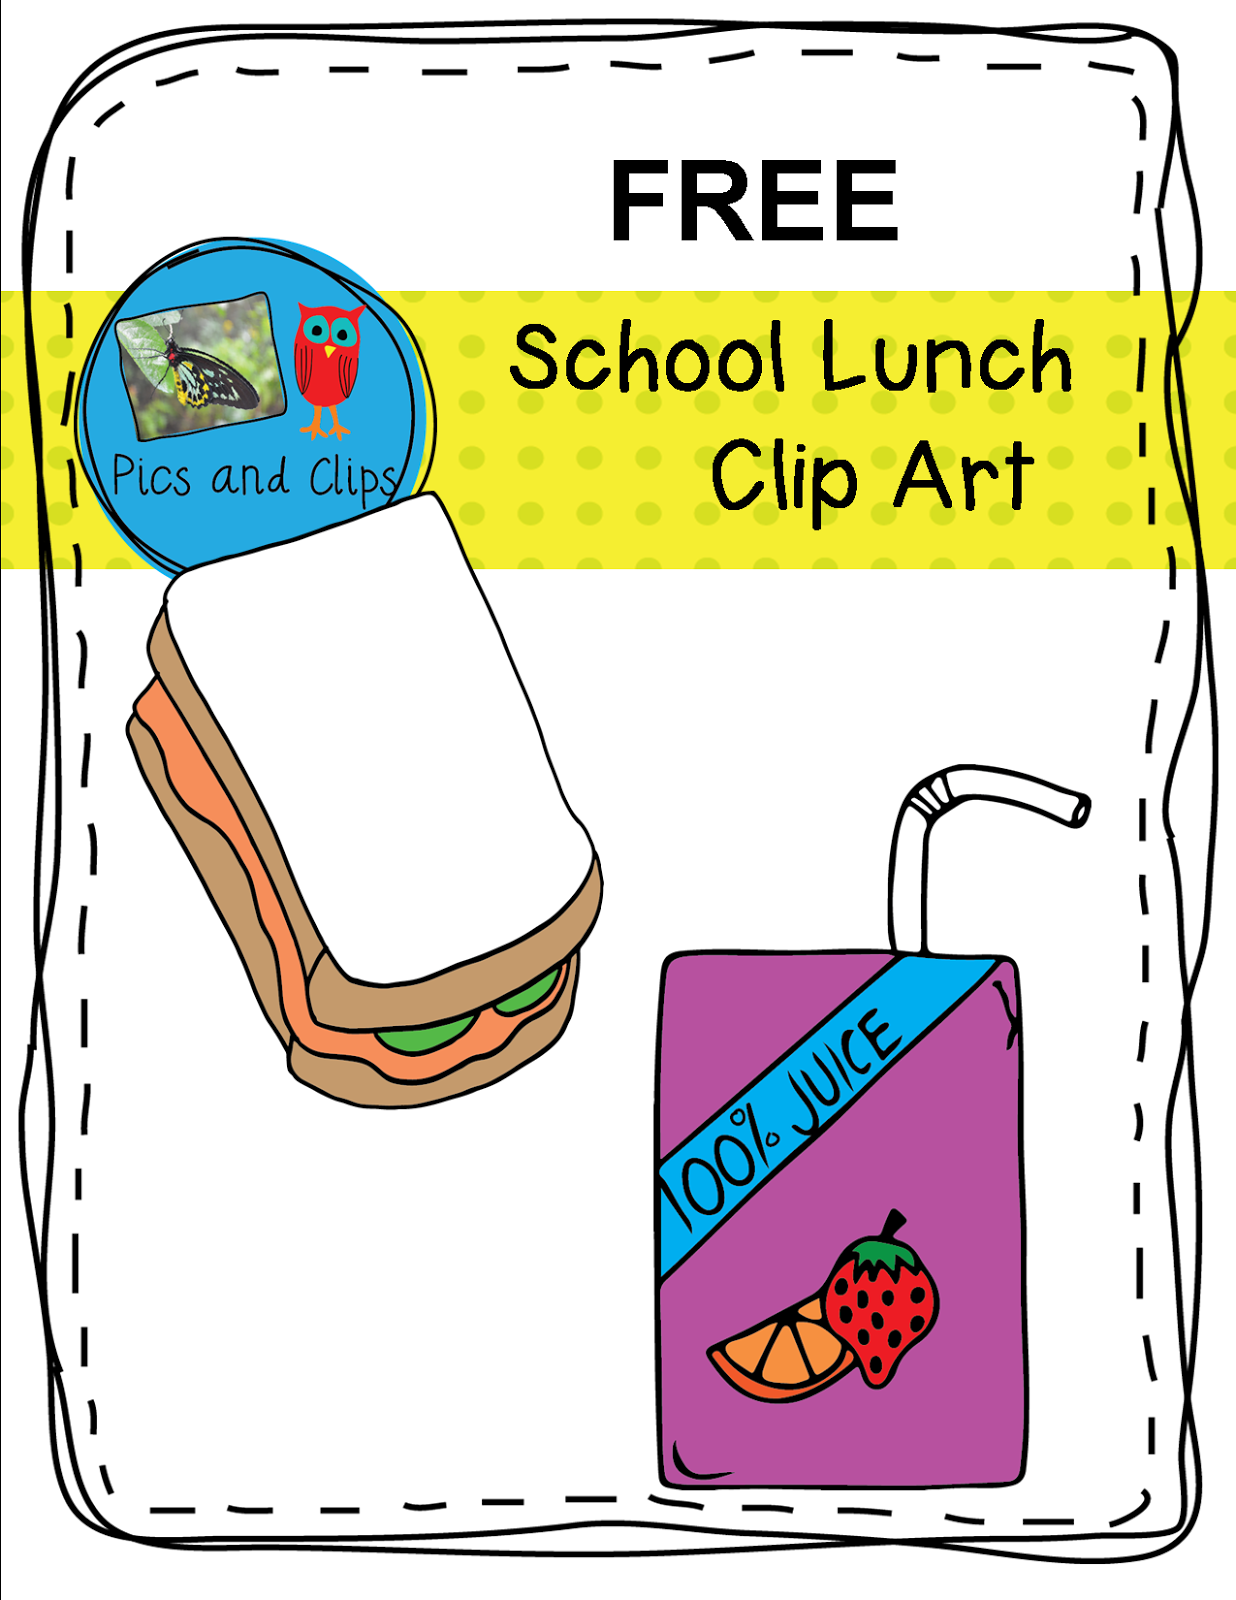 Free school lunch tray clipart